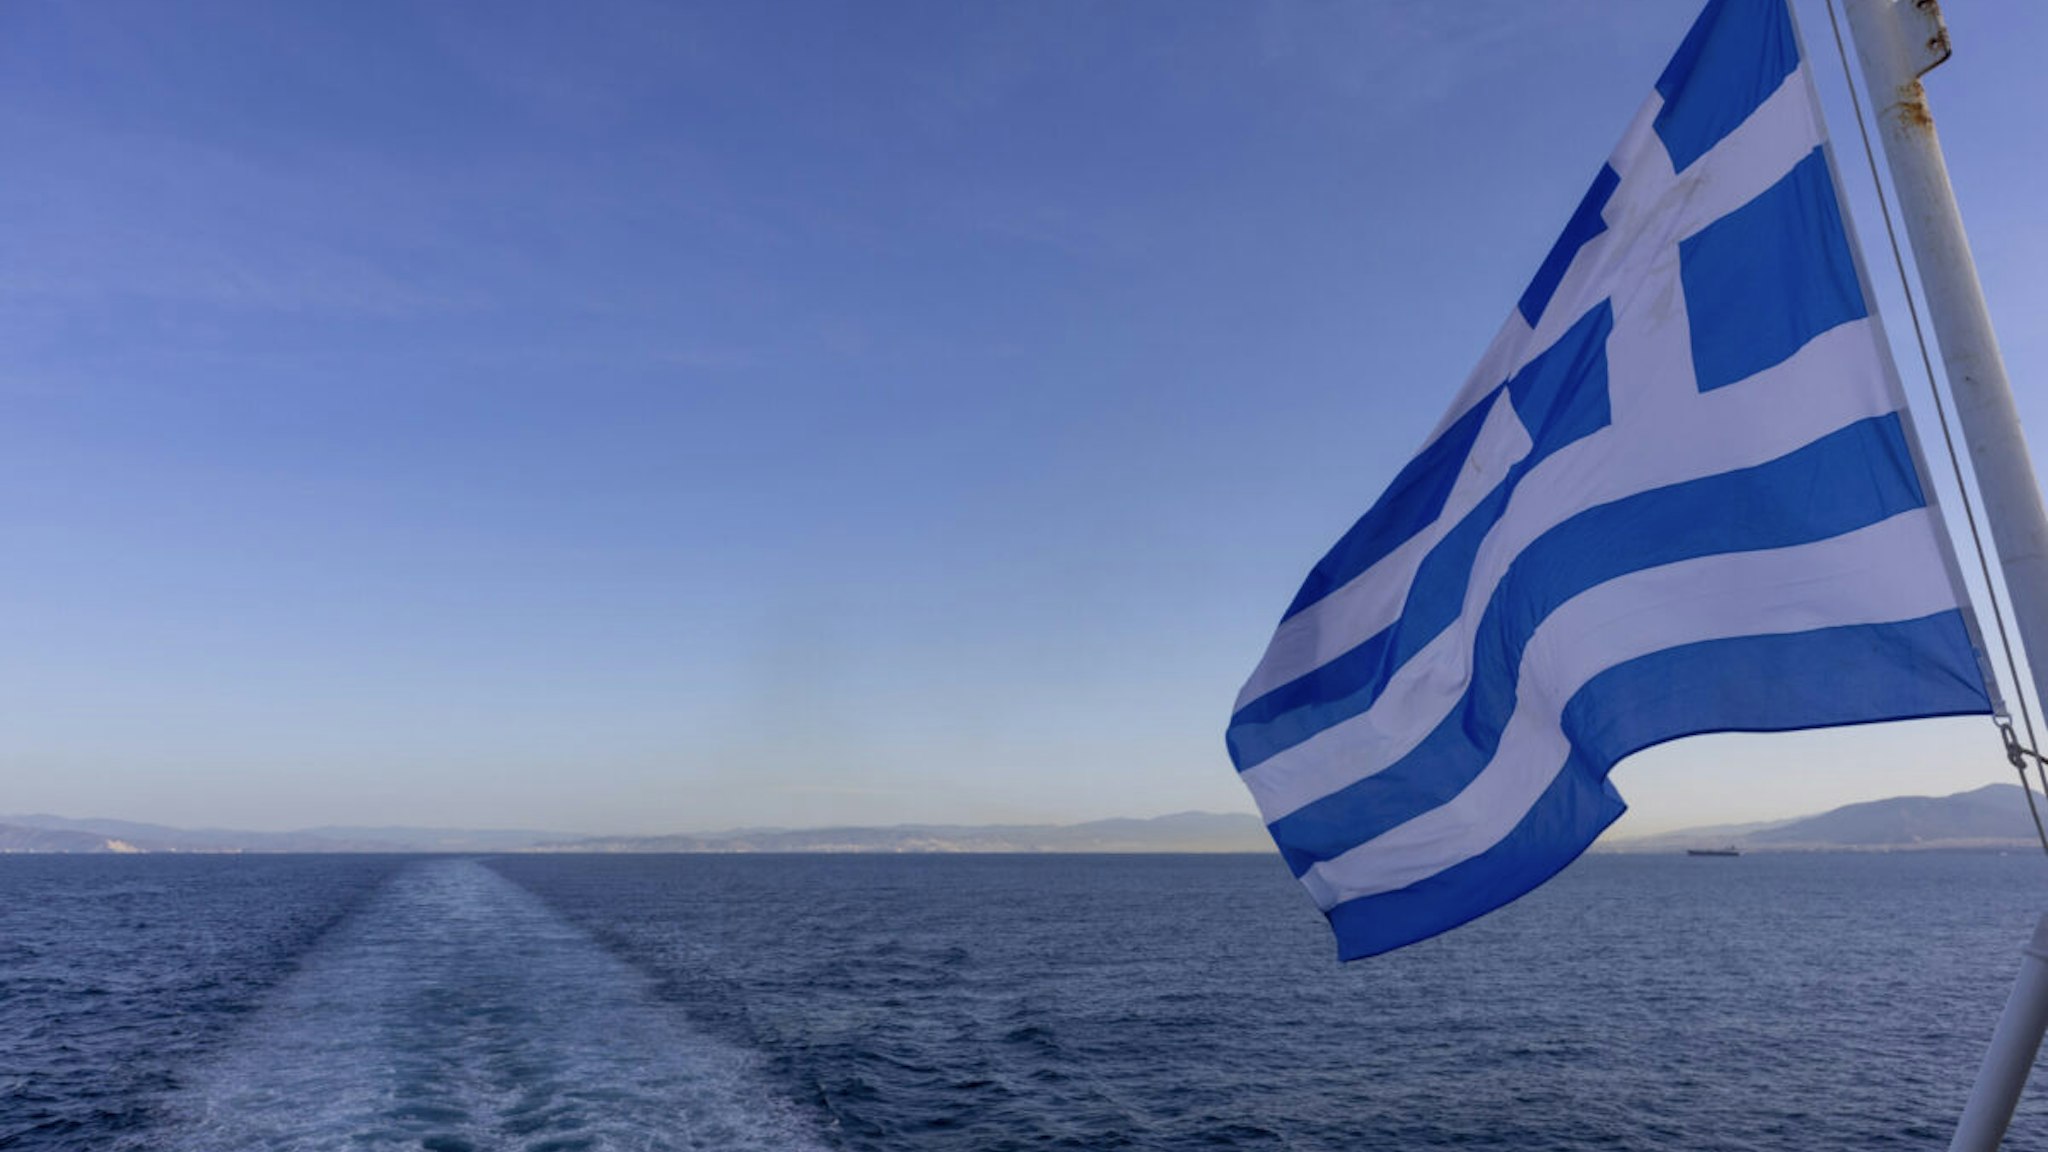 TINOS, GREECE - APRIL 14: View of greek flag from ship leaving the port Tino island on April 14, 2021 in Tinos, Greece.